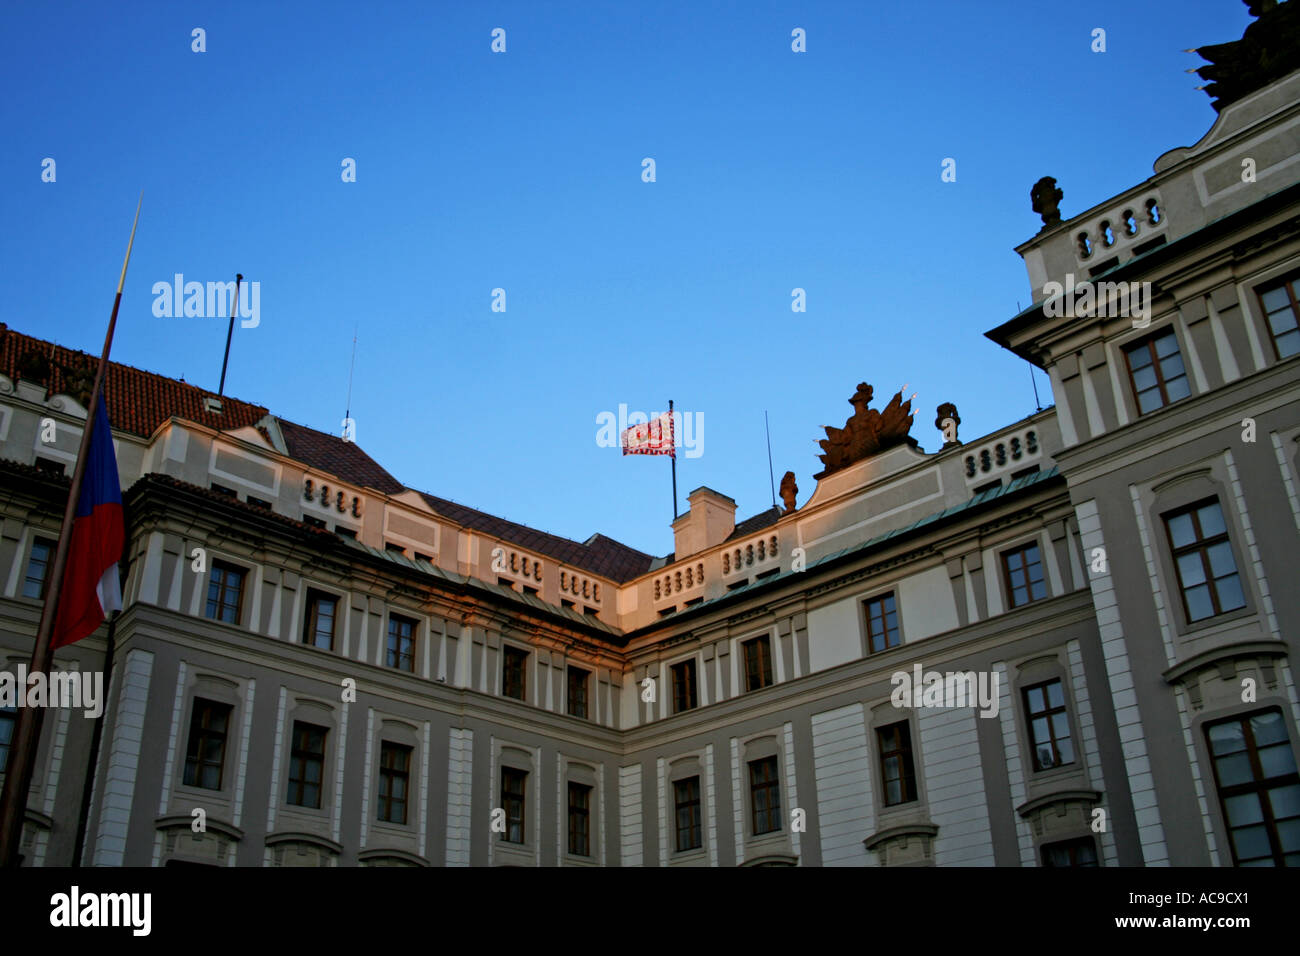 Historic architecture and national flag at dusk, Prague. Stock Photo